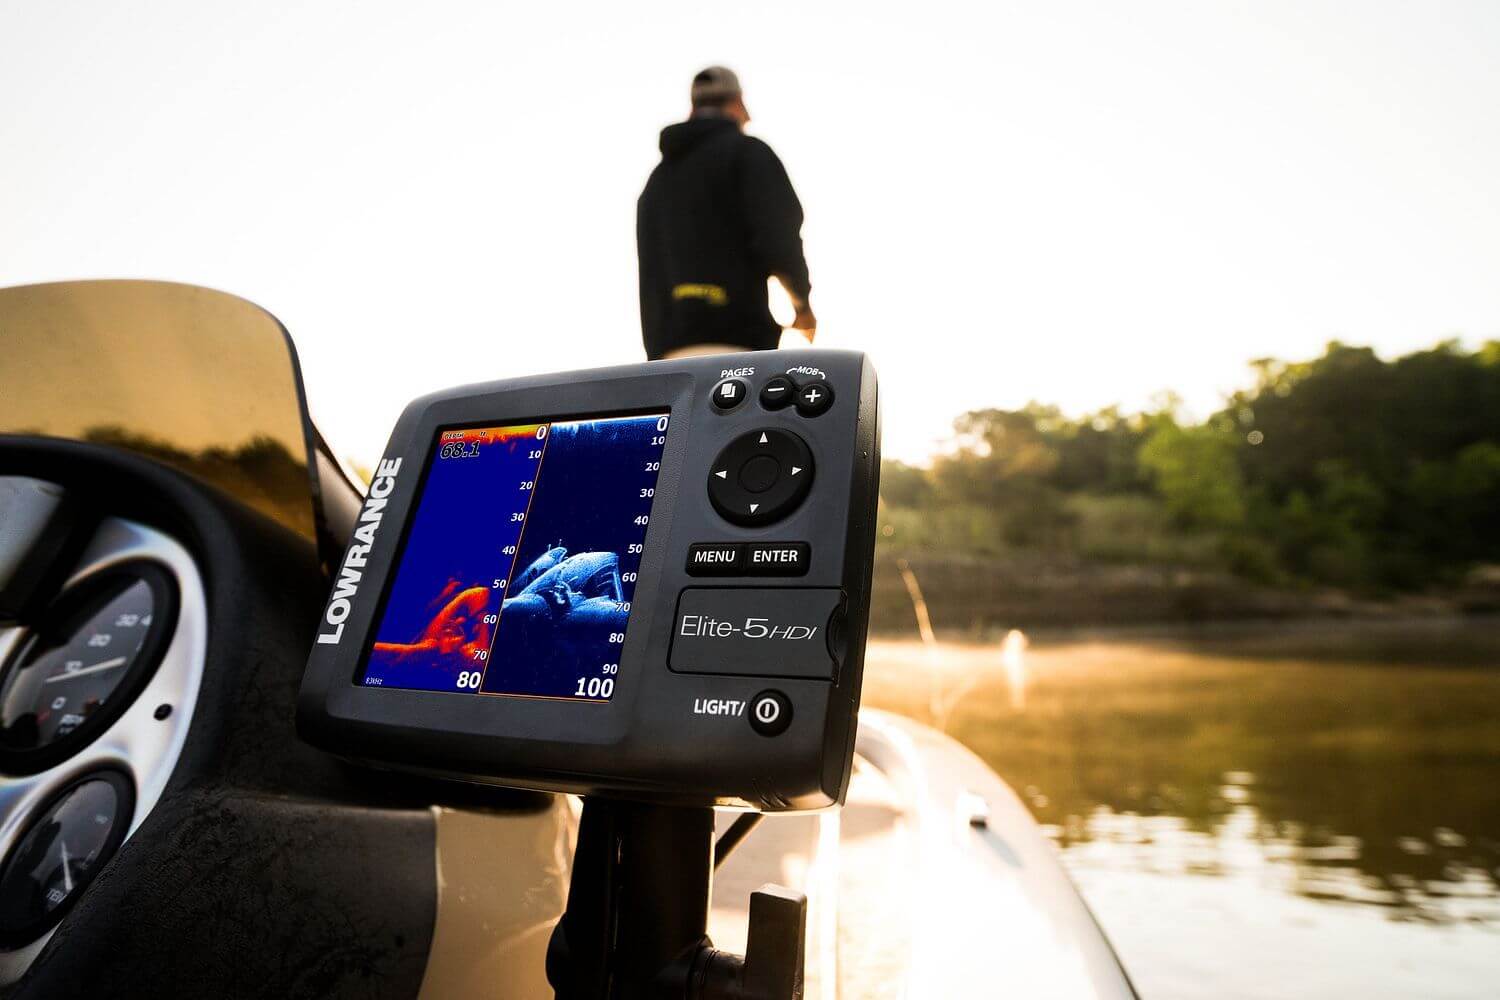 location-how-to-install-a-fishfinder-11-2022 